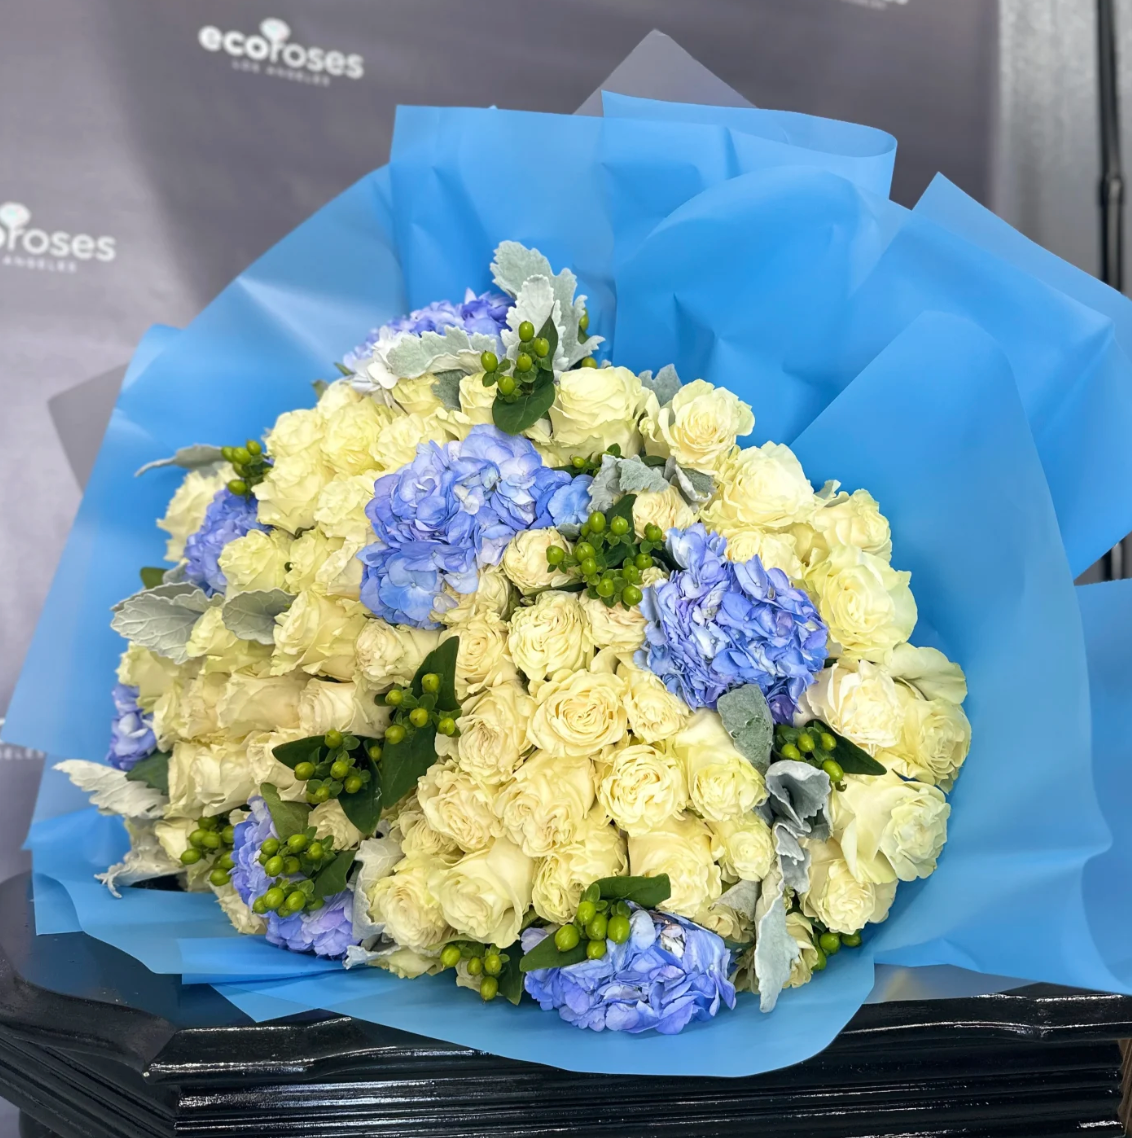 AzureHarmony bouquet, featuring stunning azure-colored flowers and complementary blooms in a harmonious arrangement La Crescenta Florist